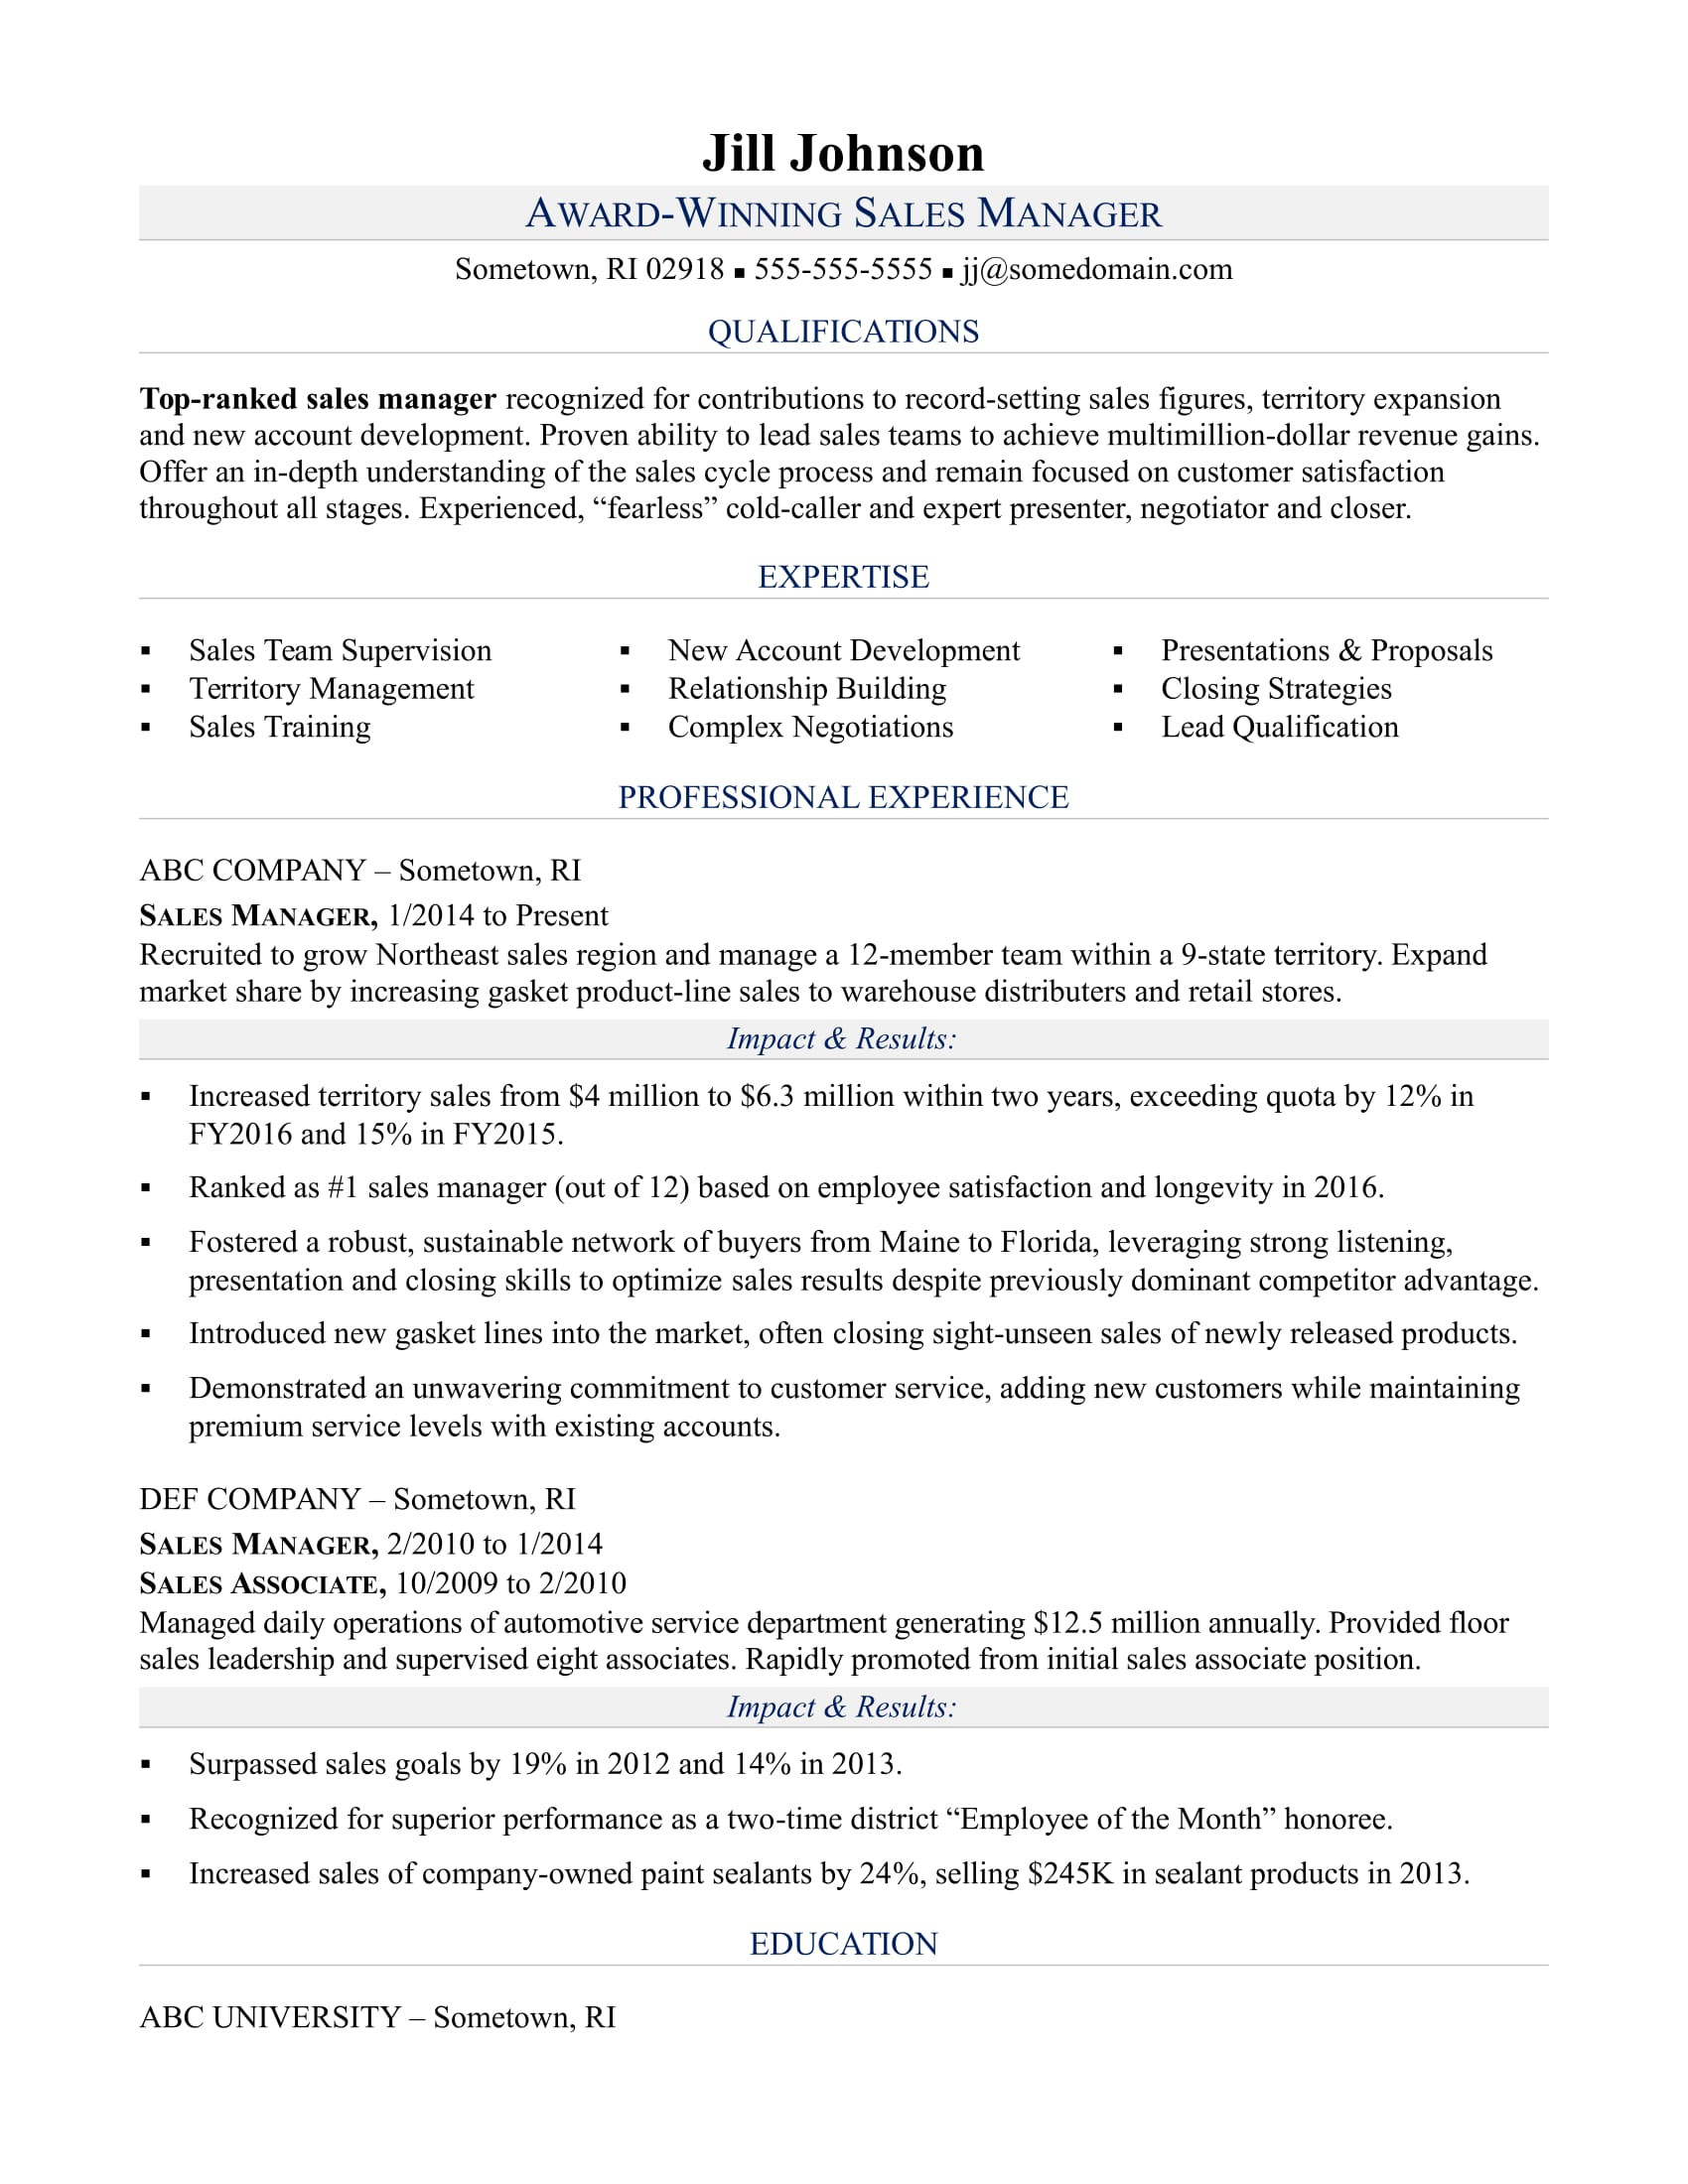 Regional Sales Manager Resume Objective Samples Sales Manager Resume Sample Monster.com